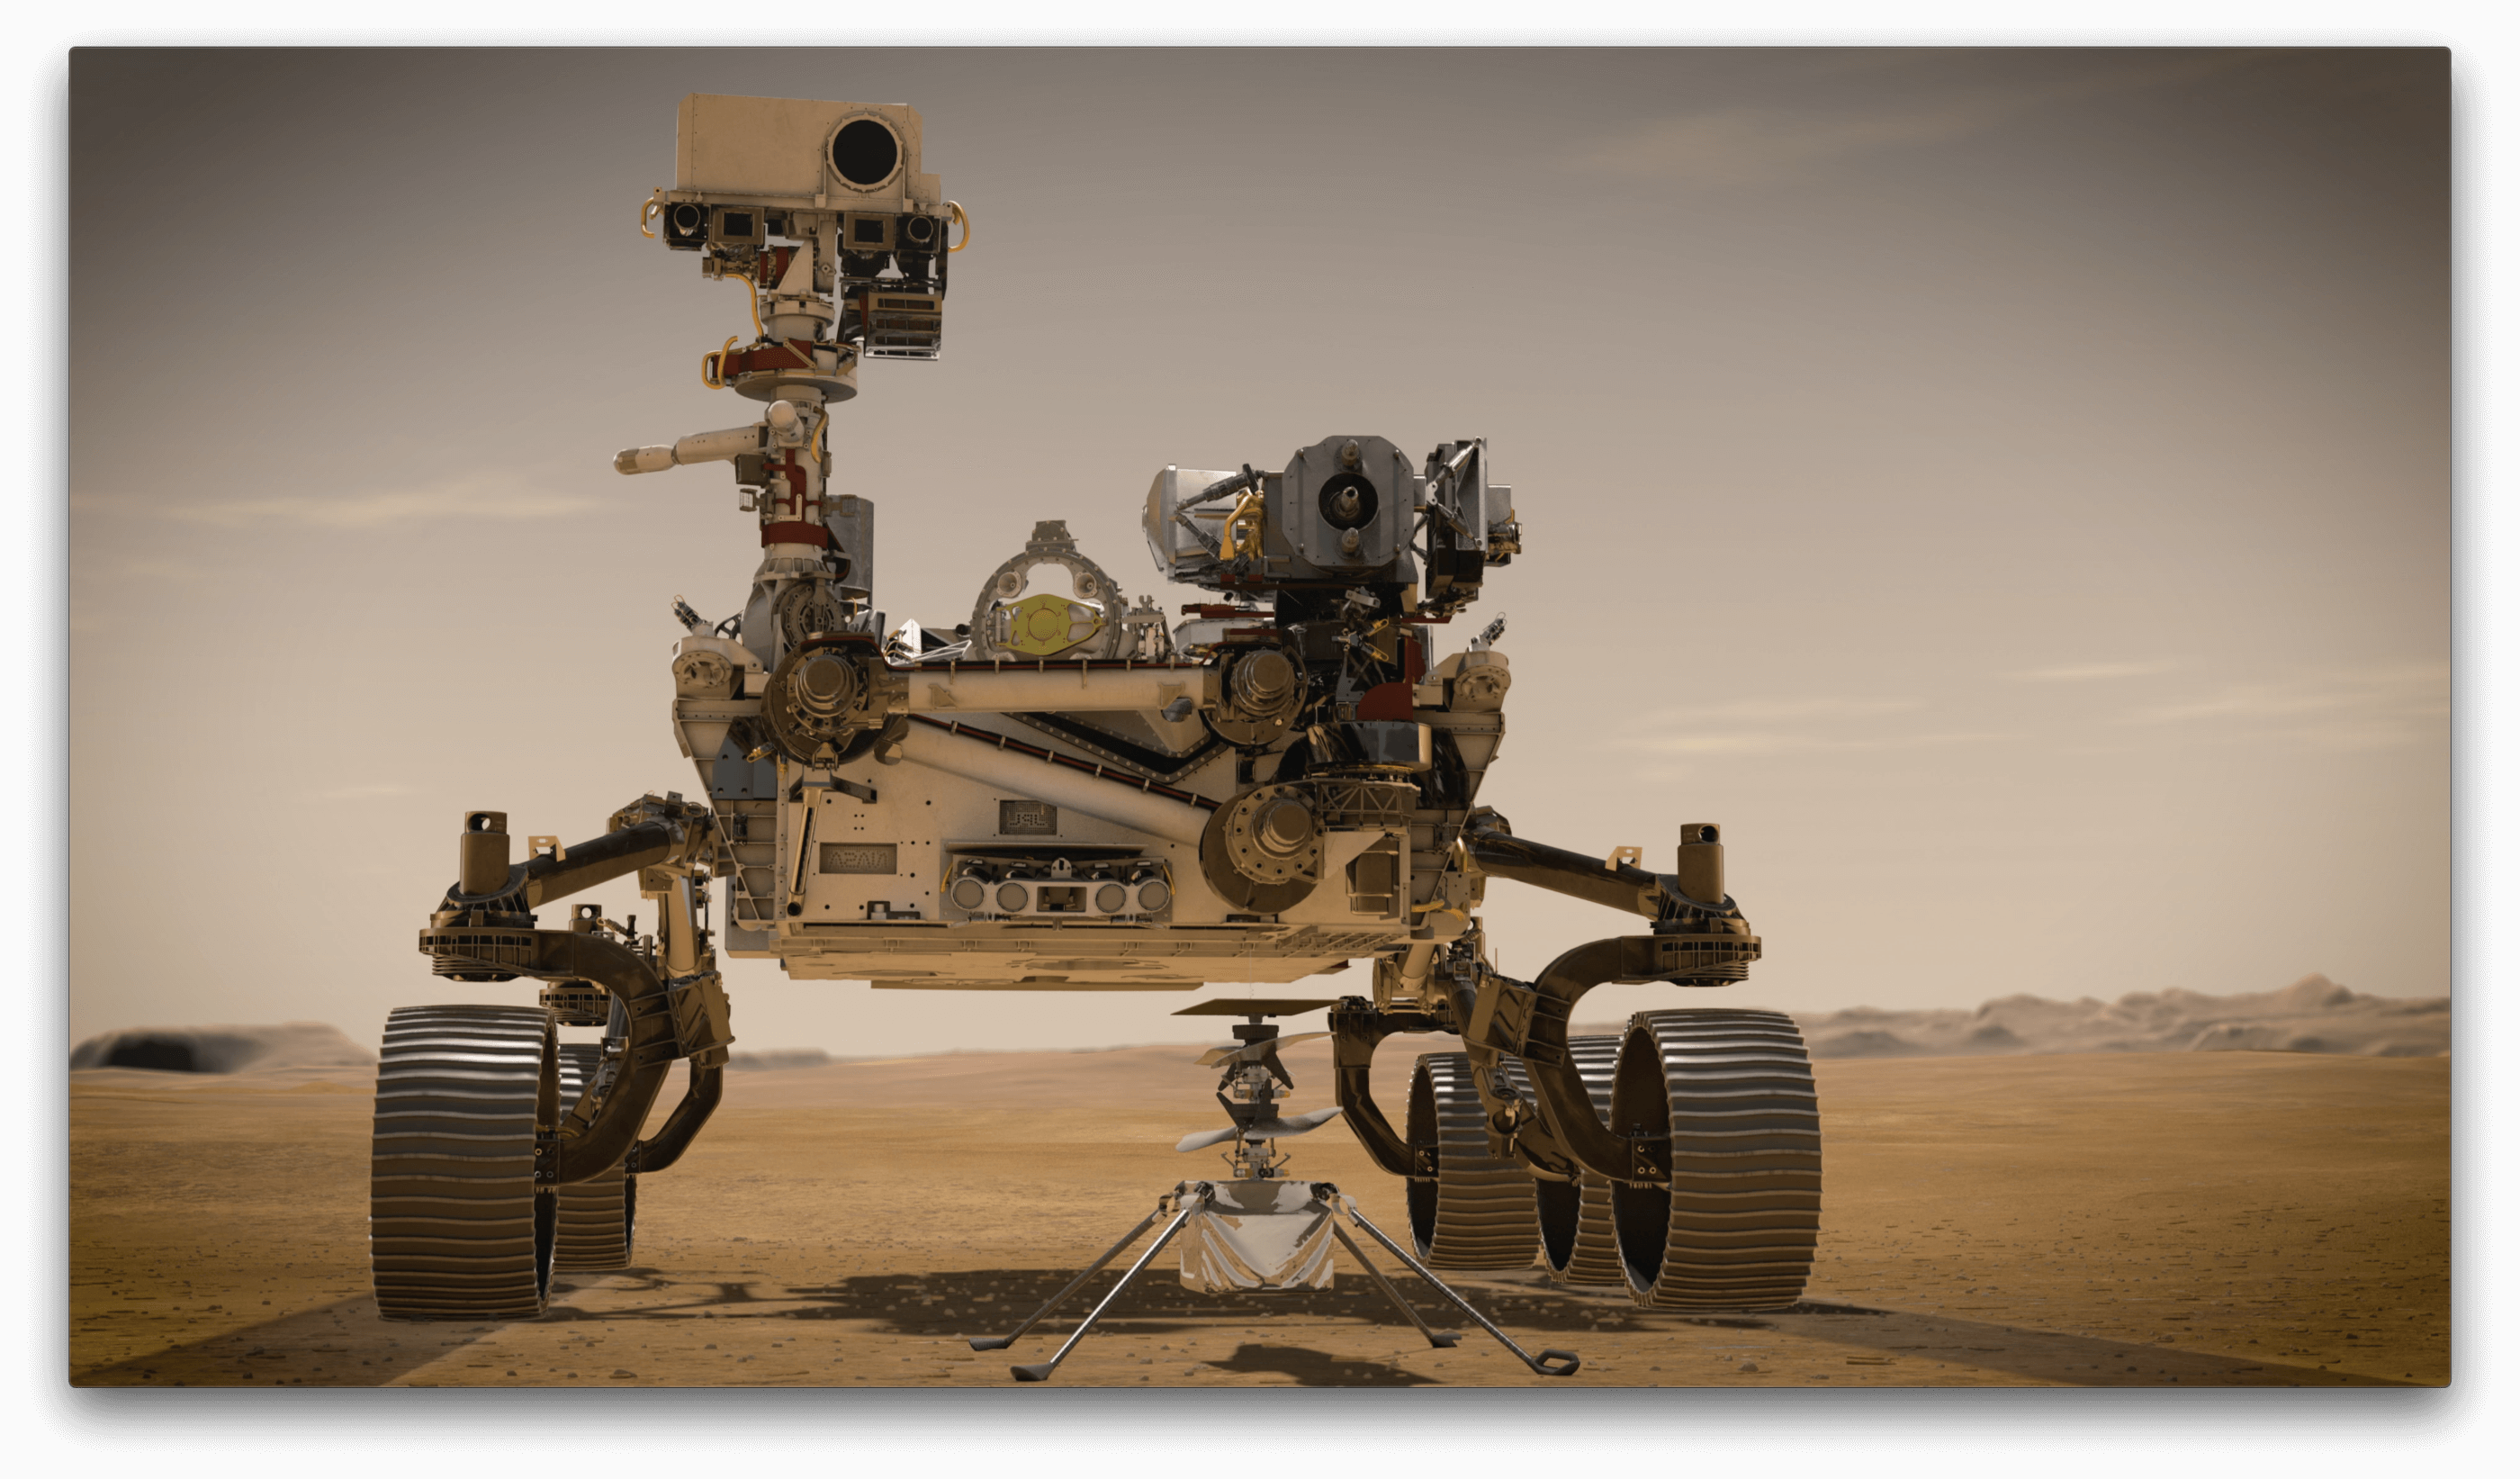 NASA's Mars 2020 Perseverance rover stands behind Ingenuity in this artist's concept. Perseverance is the most sophisticated rover NASA has ever sent to Mars, and will arrive at Jezero Crater with Ingenuity attached to its belly. NASA Image